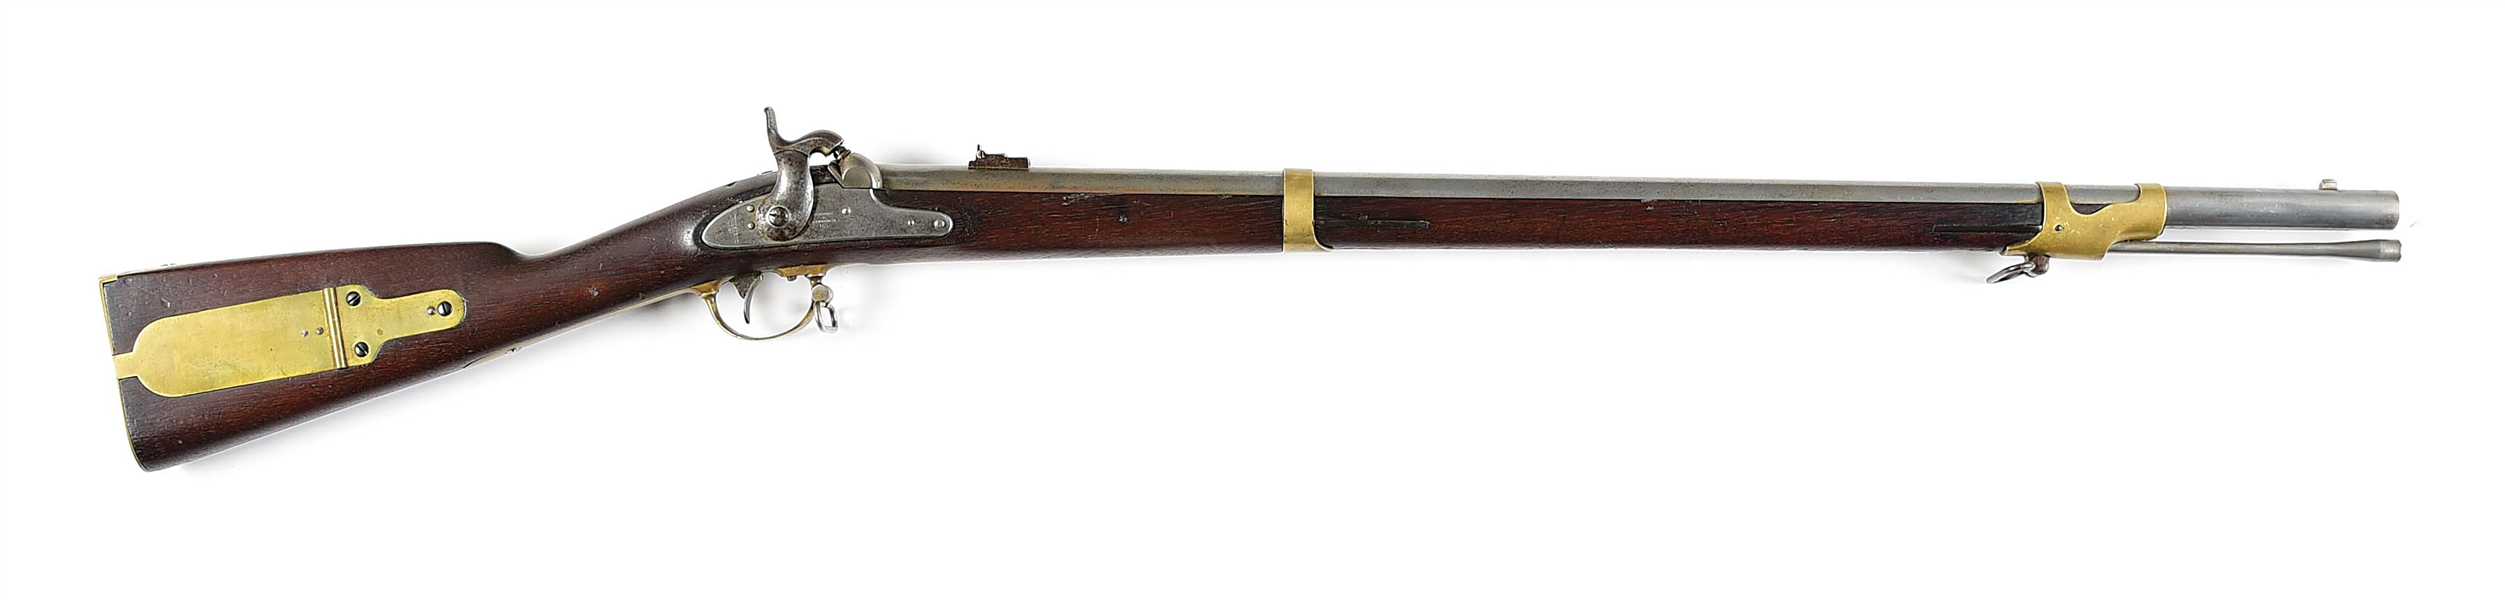 (A) SCARCE CIVIL WAR NEW HAMPSHIRE ALTERATION ROBBINS & LAWRENCE MODEL 1841 .54 CALIBER "MISSISSIPPI" PERCUSSION RIFLE DATED 1849.